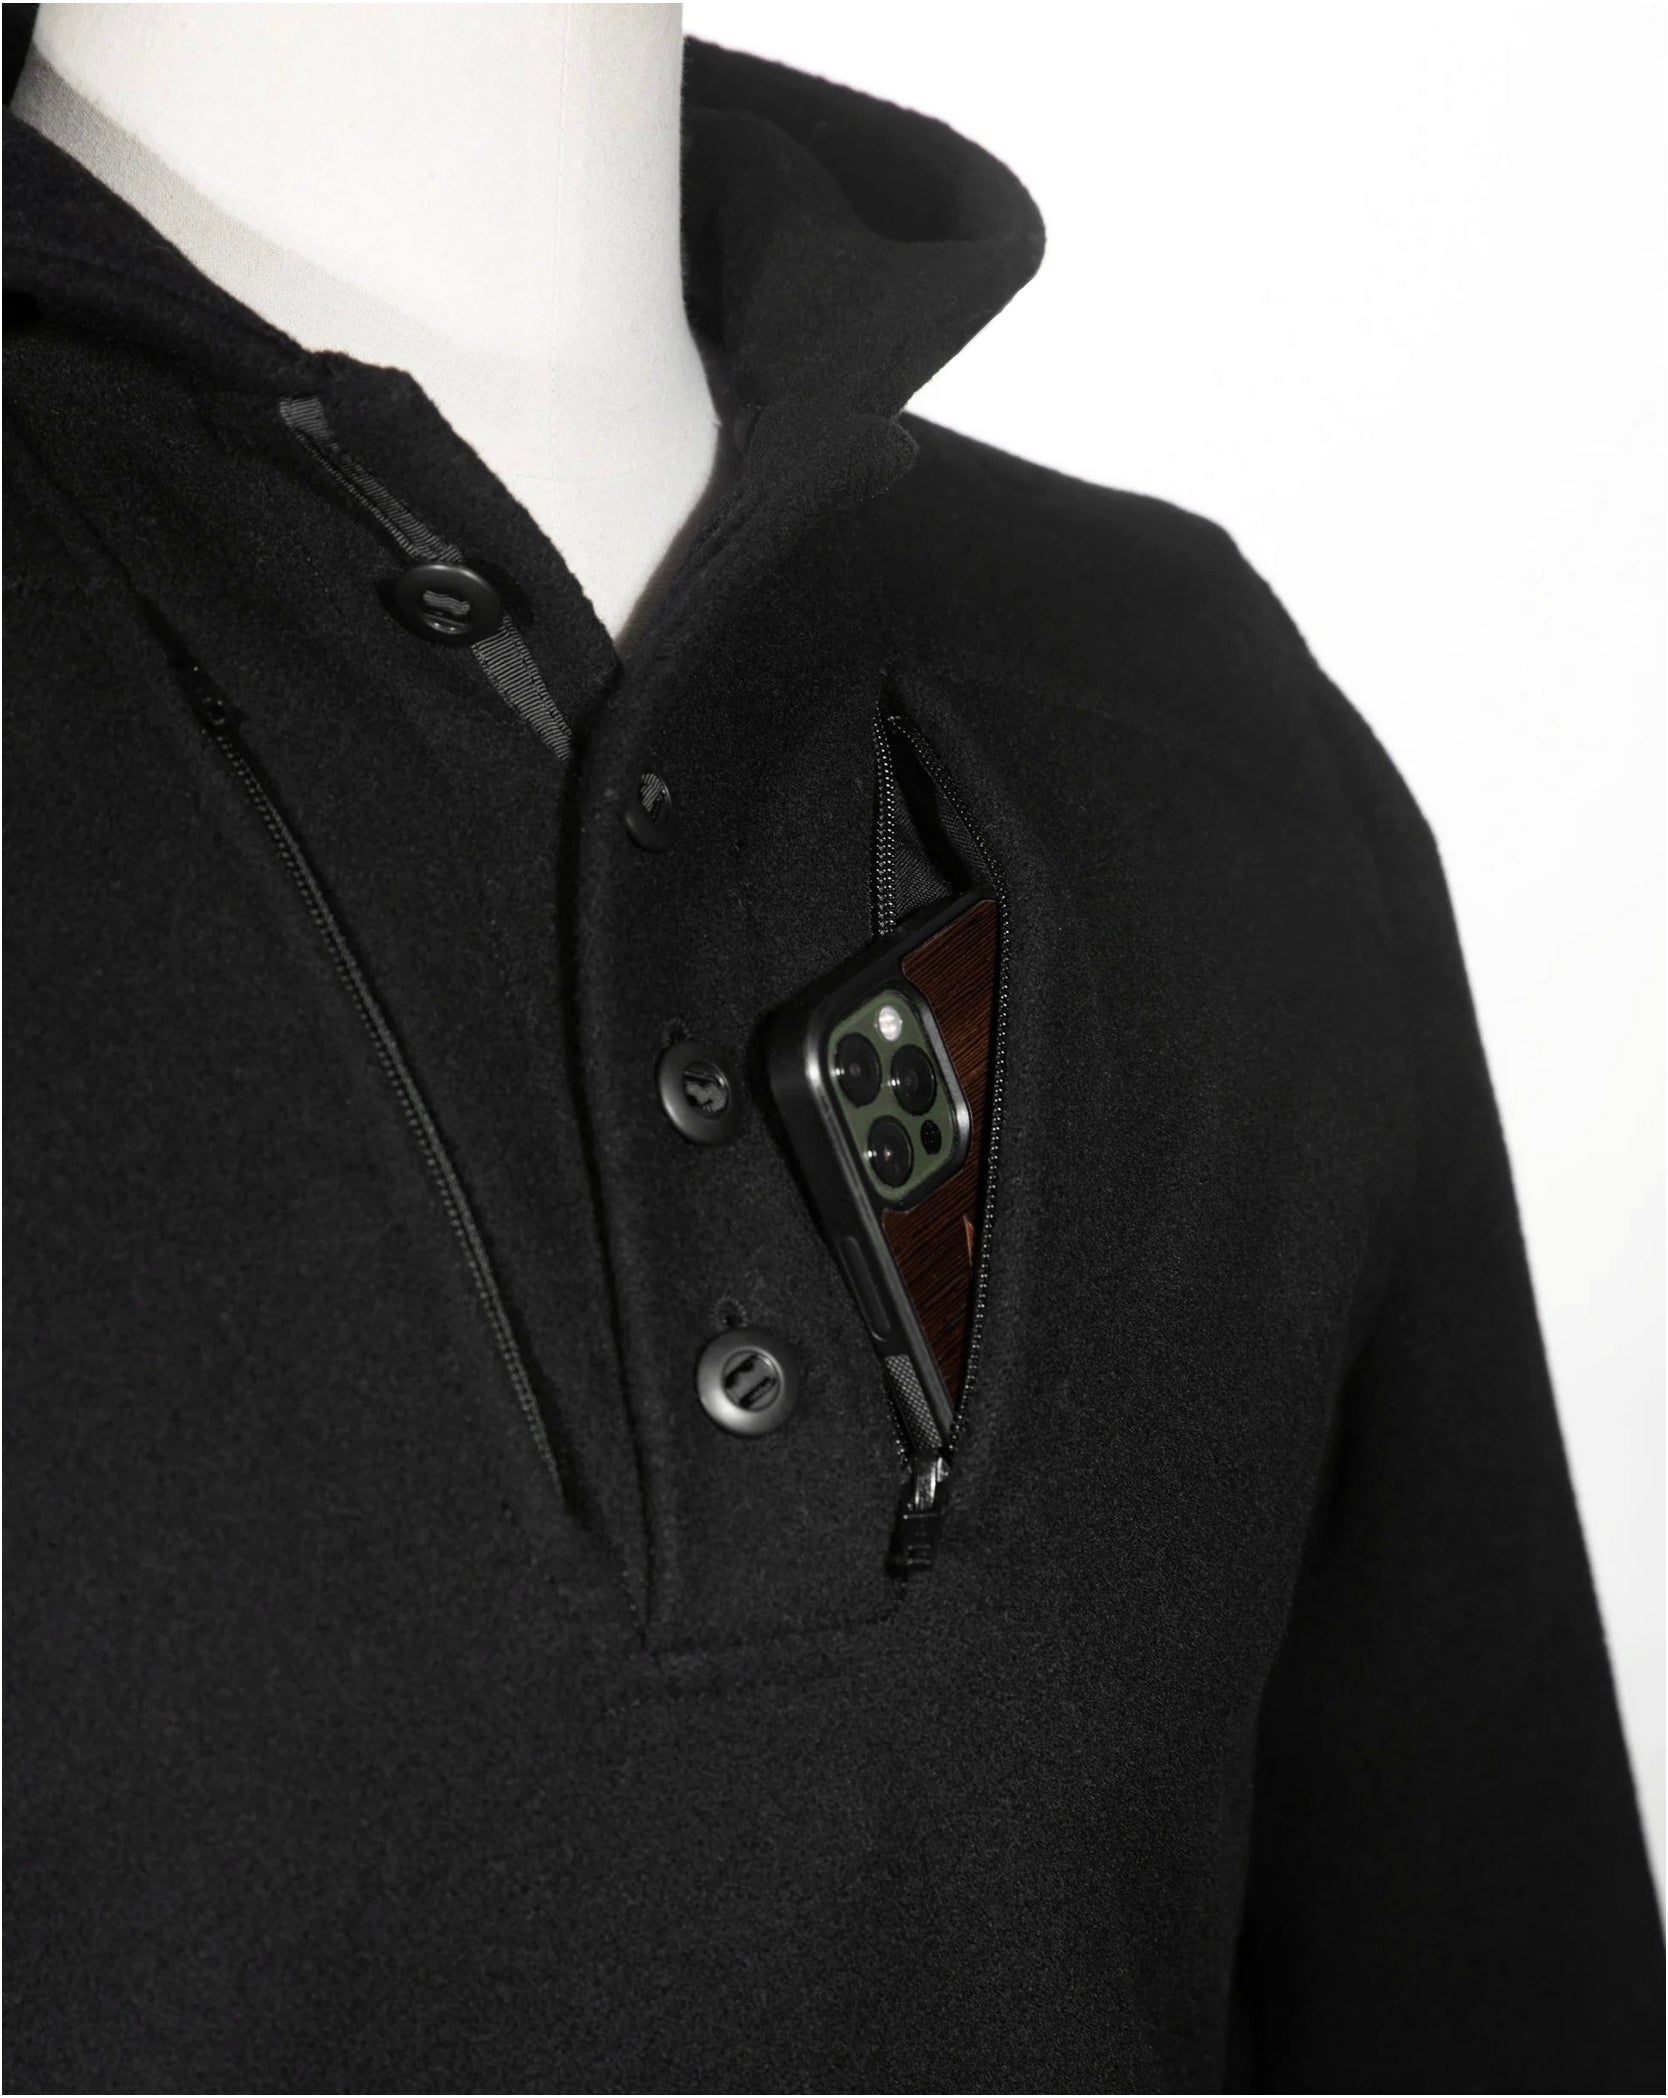 The WeatherWool Al's Anorak has two large cell phone pockets.